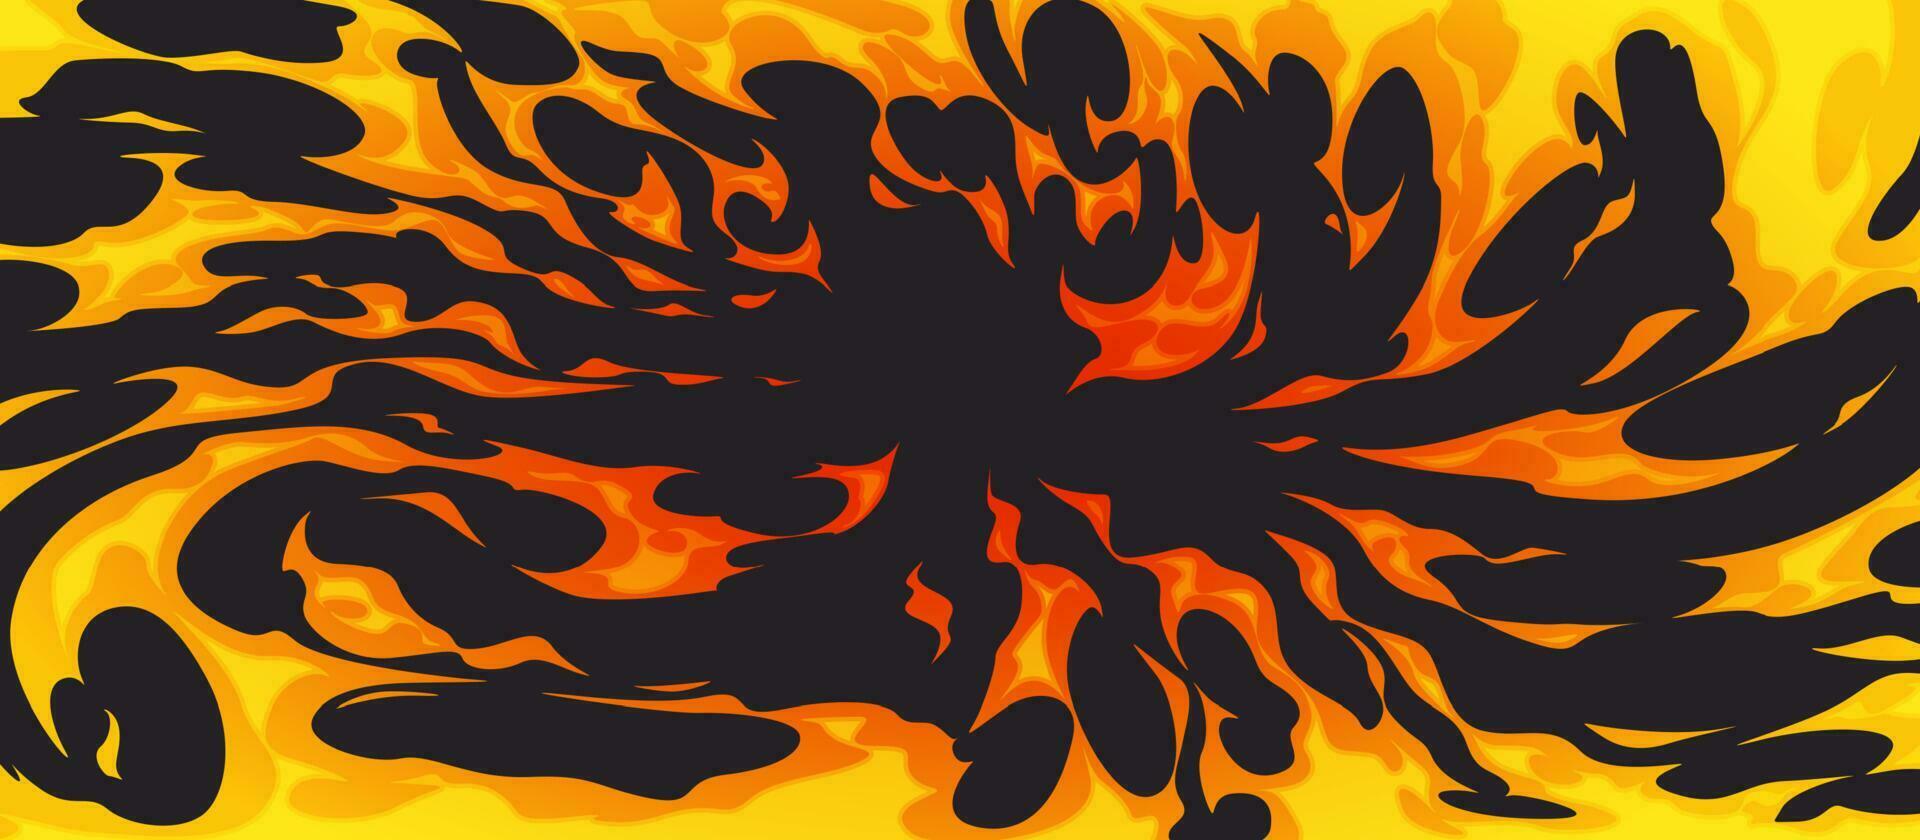 Comic fire on black background vector